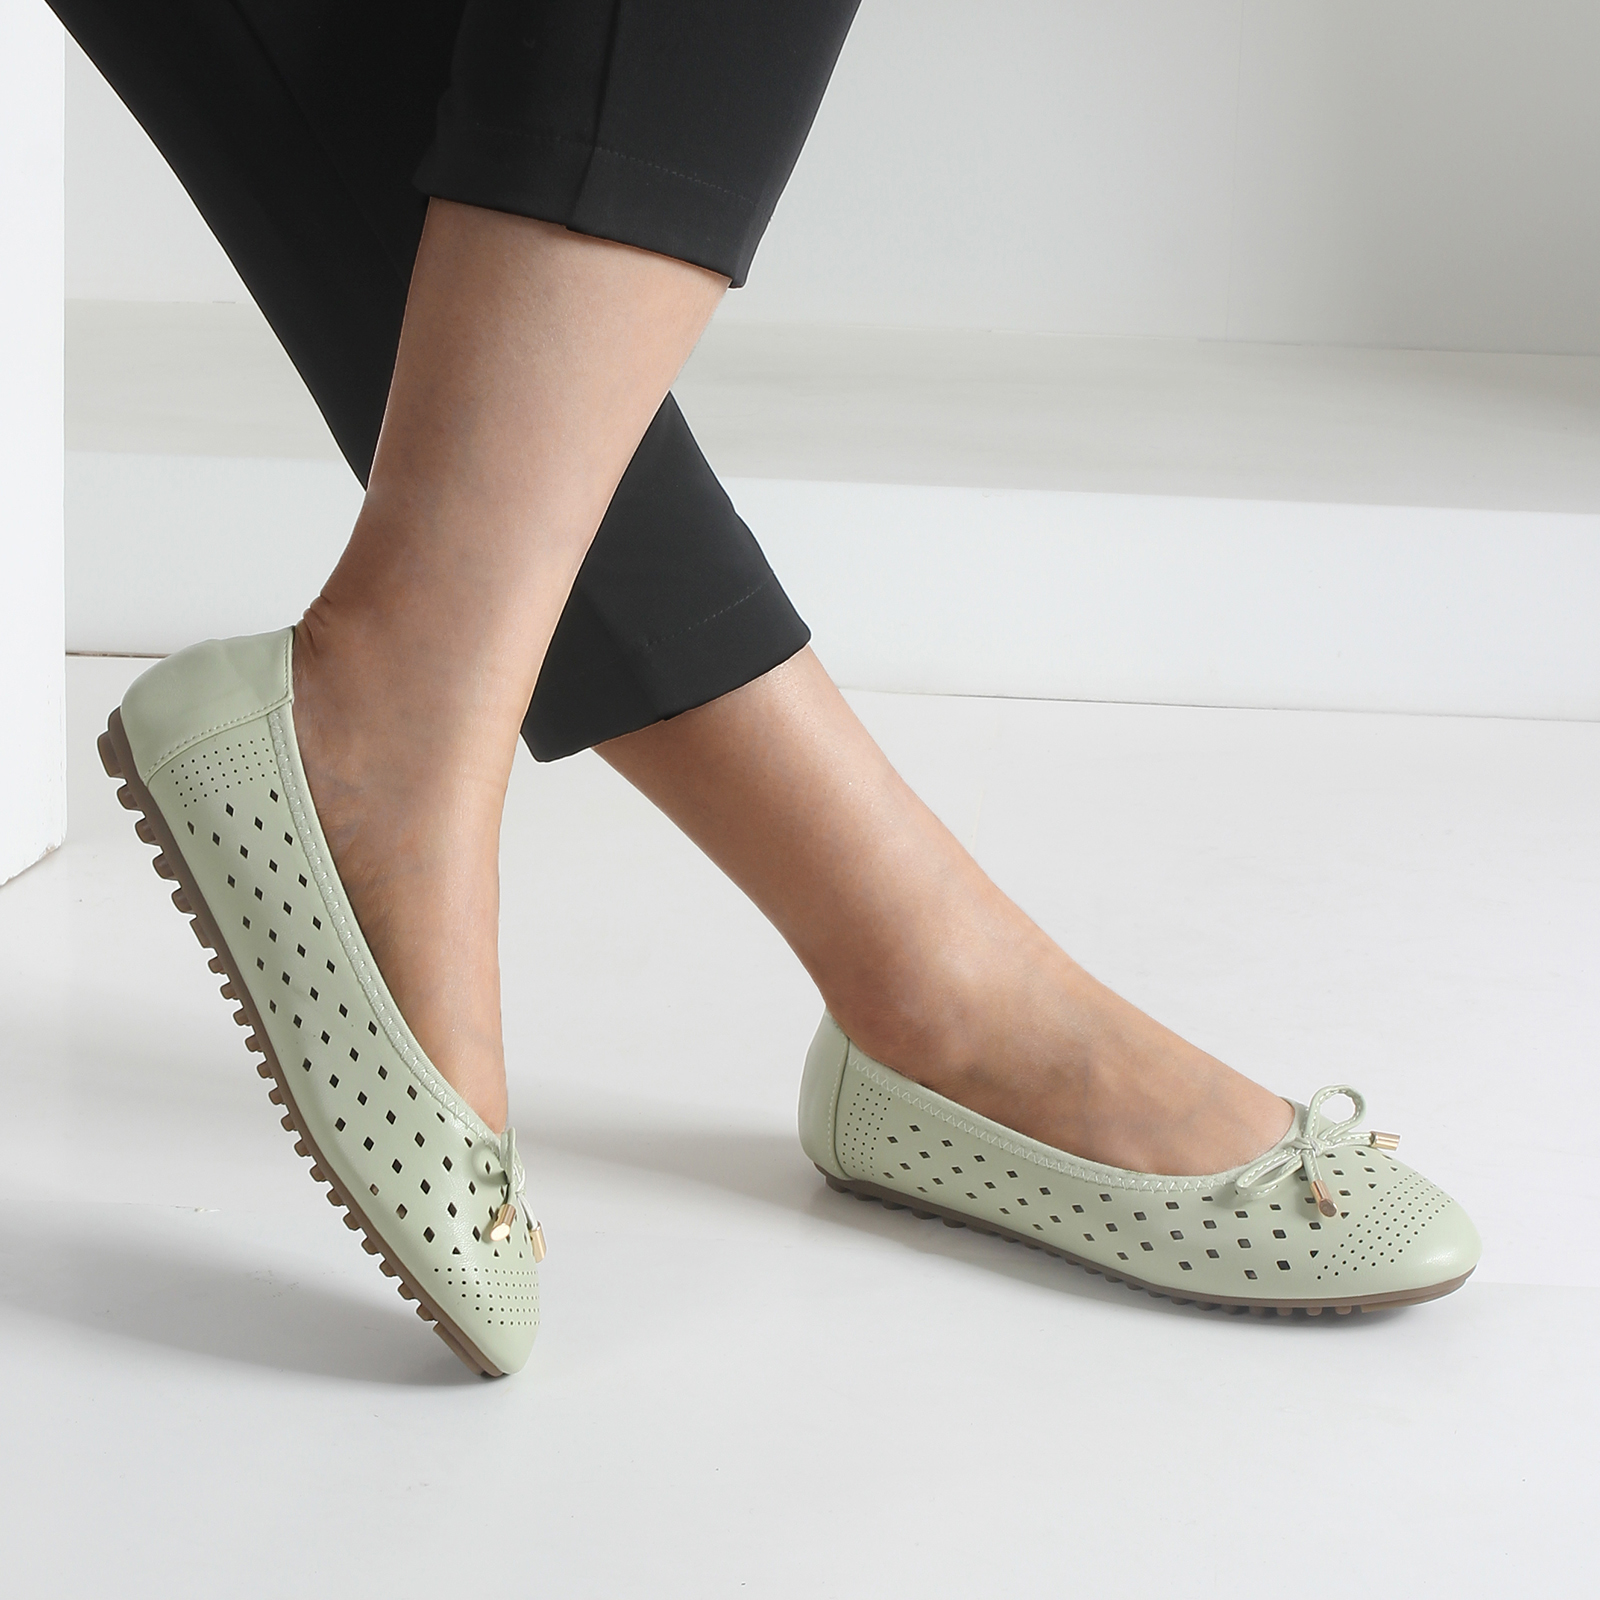 MUSSHOE Hallowed-out Comfortable Flats